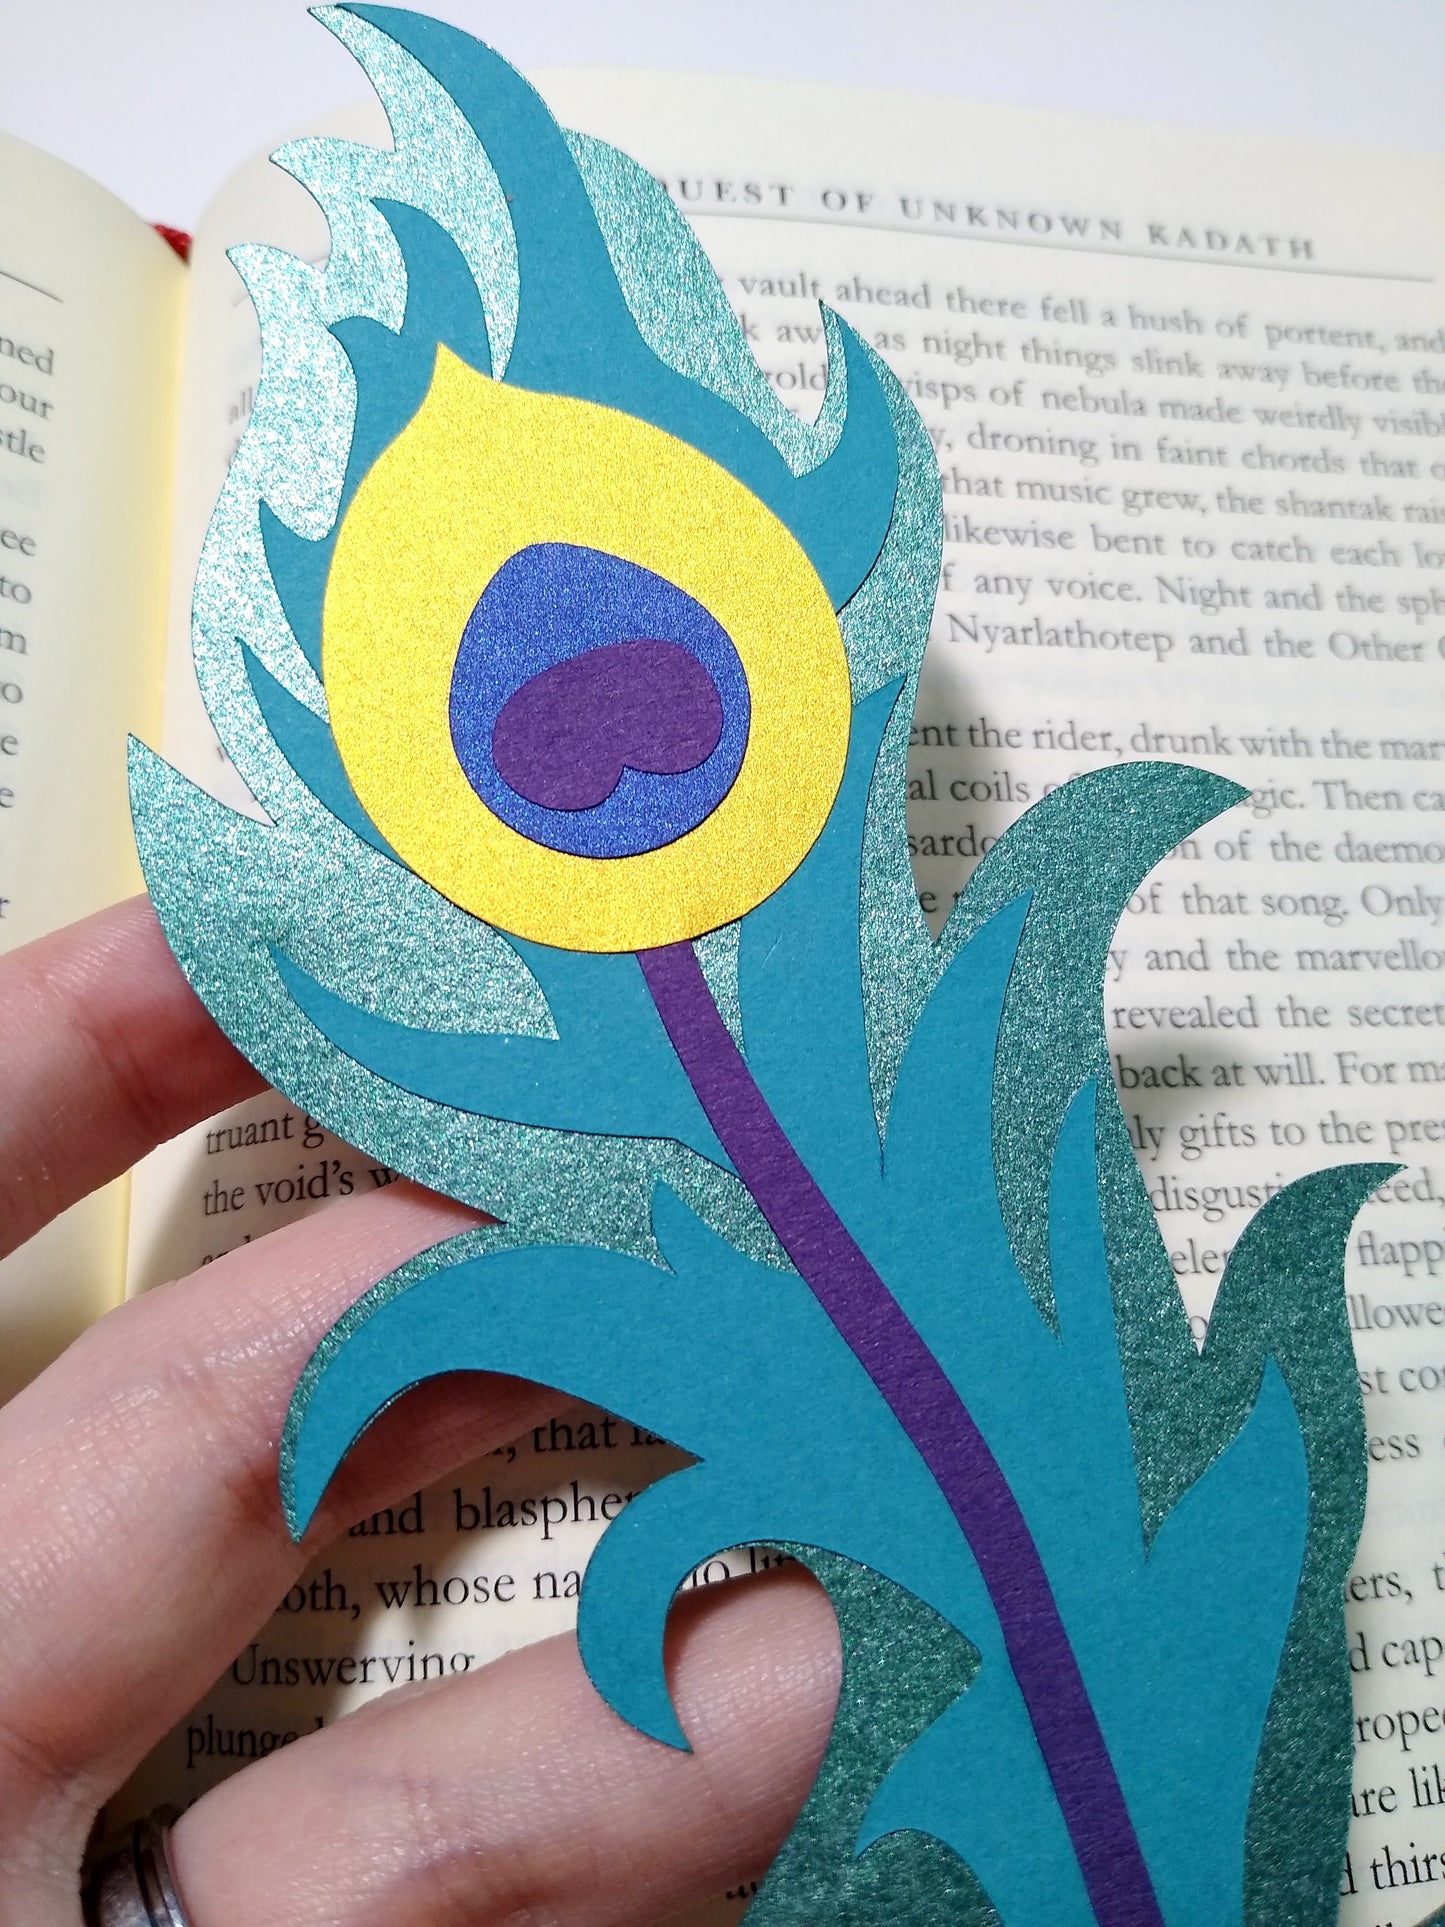 A close up of a multi-layer paper bookmark held over top of an open book. Designed to look like a long peacock feather, the layers include a shiny teal, gold, purple, metallic blue, and a flat teal.